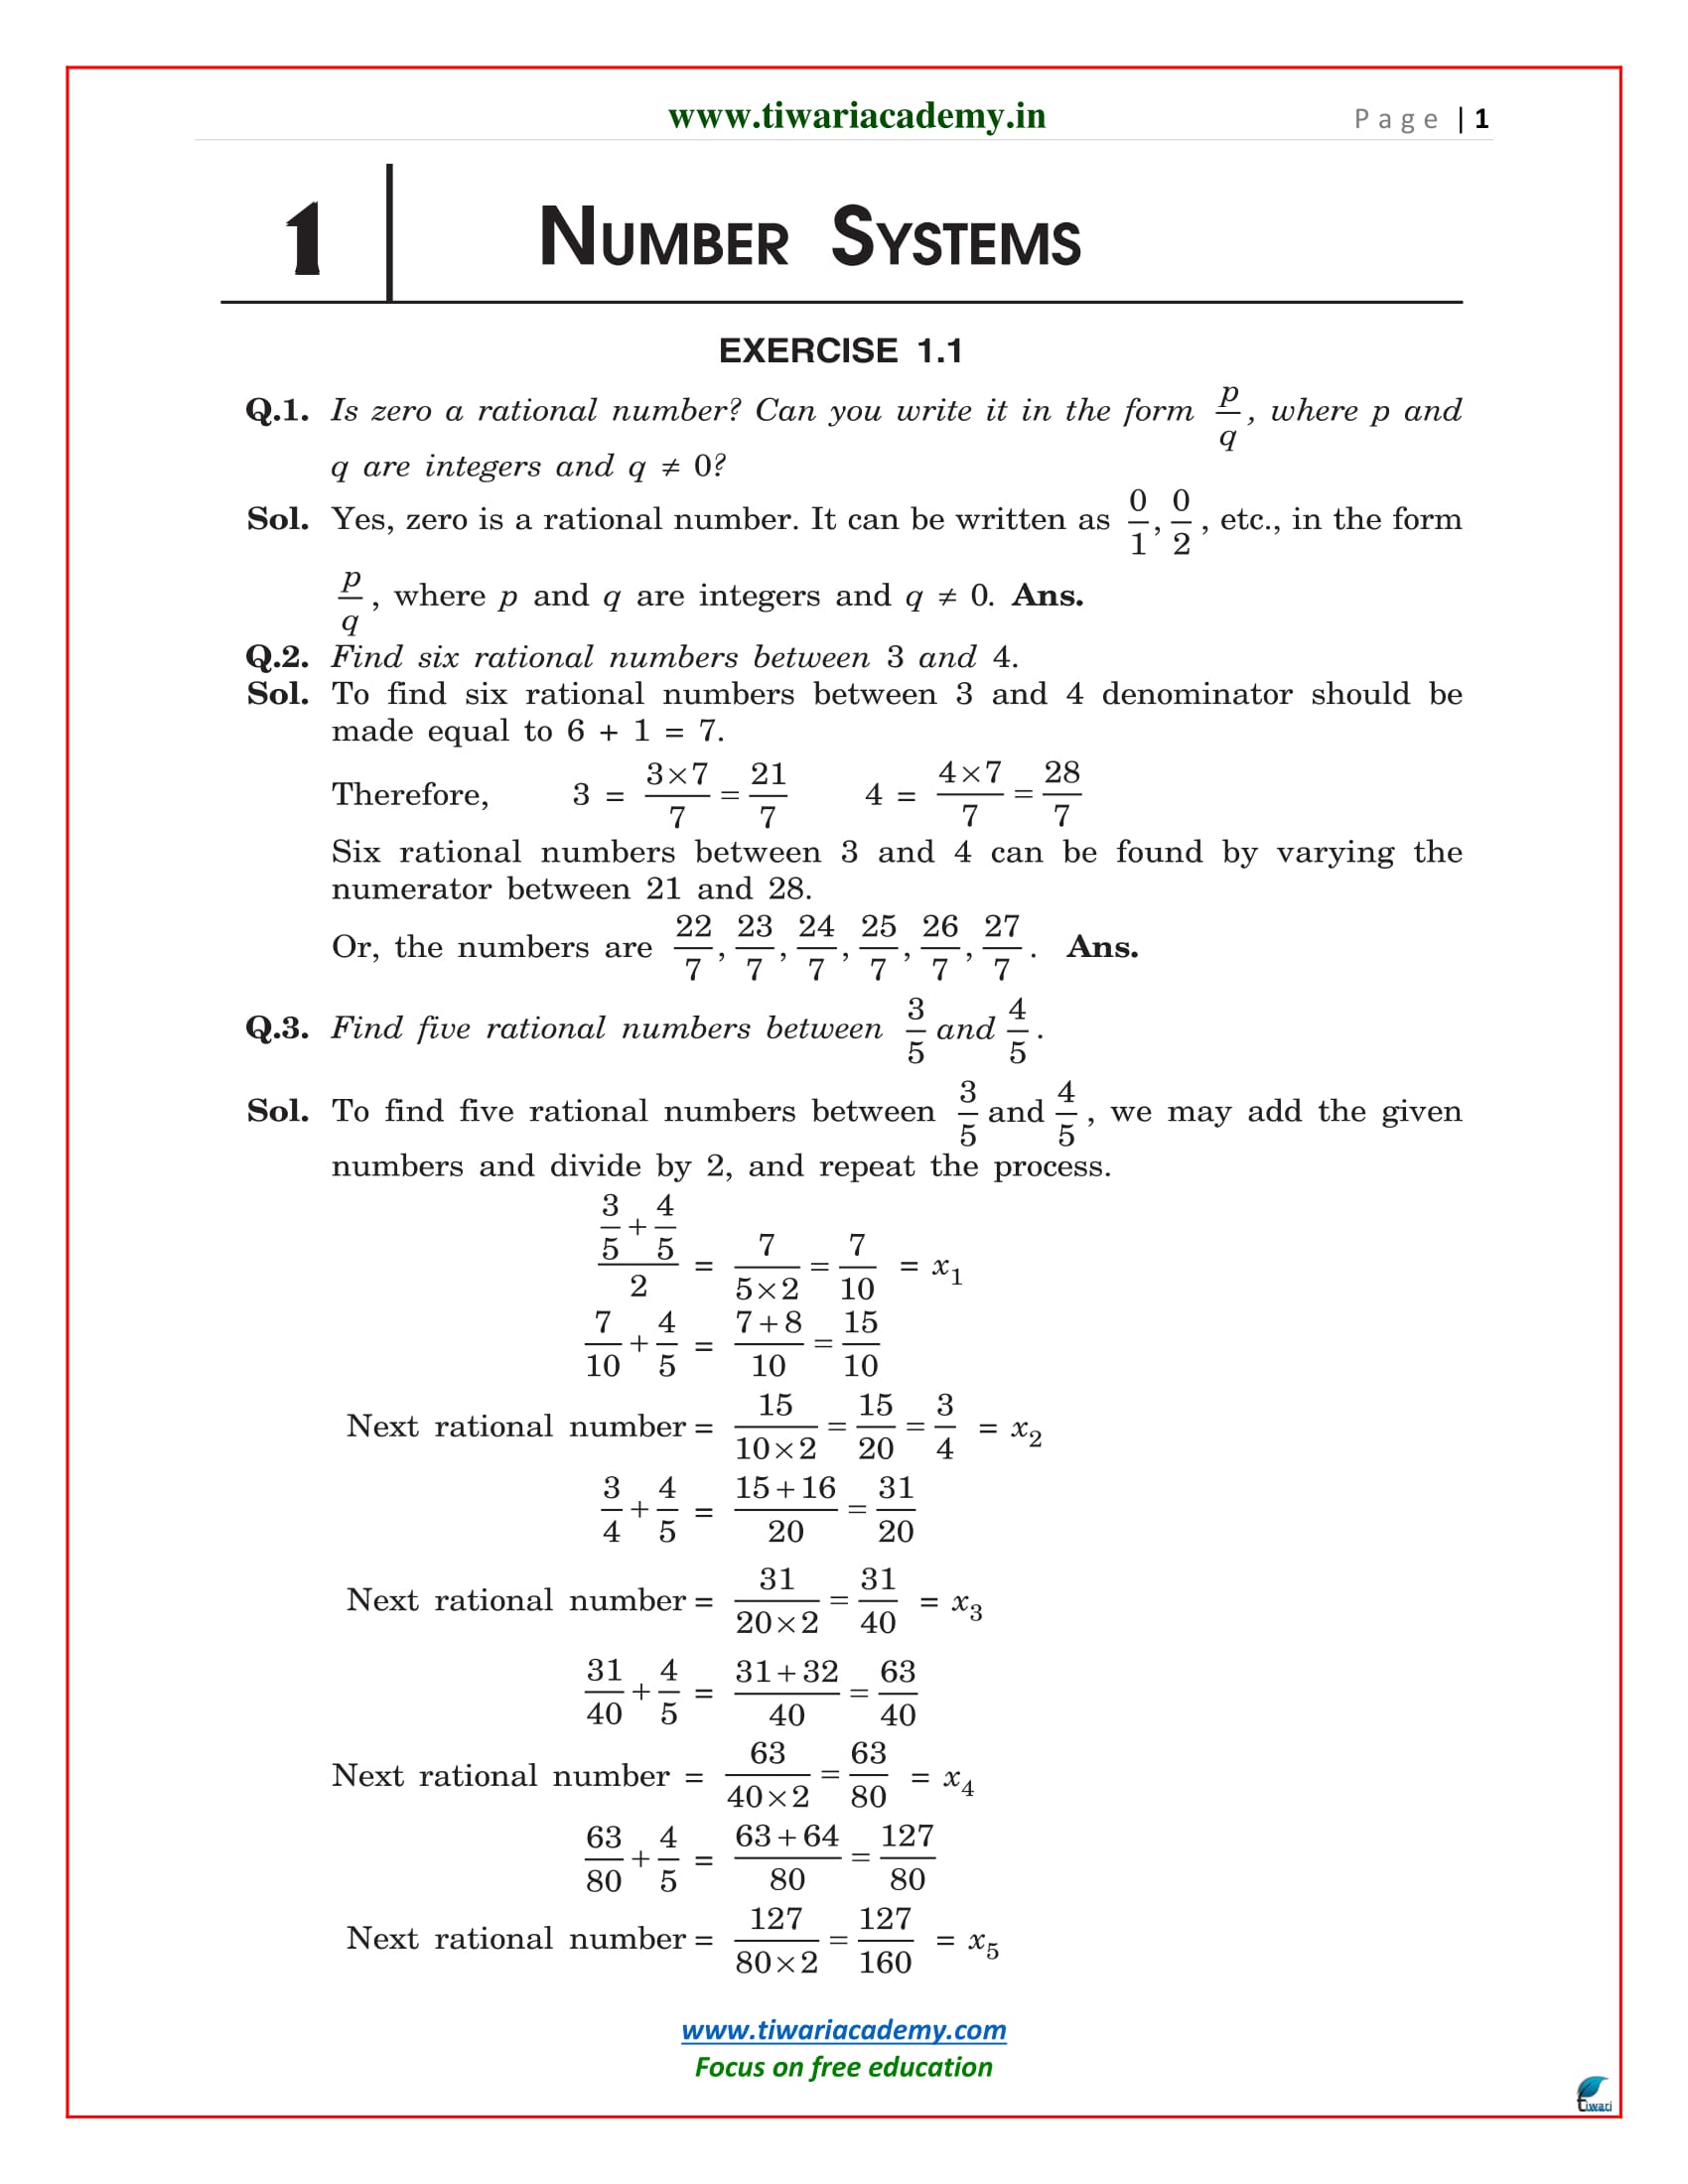 Ncert Solutions For Class 9 Maths Chapter 1 Number Systems In Pdf 